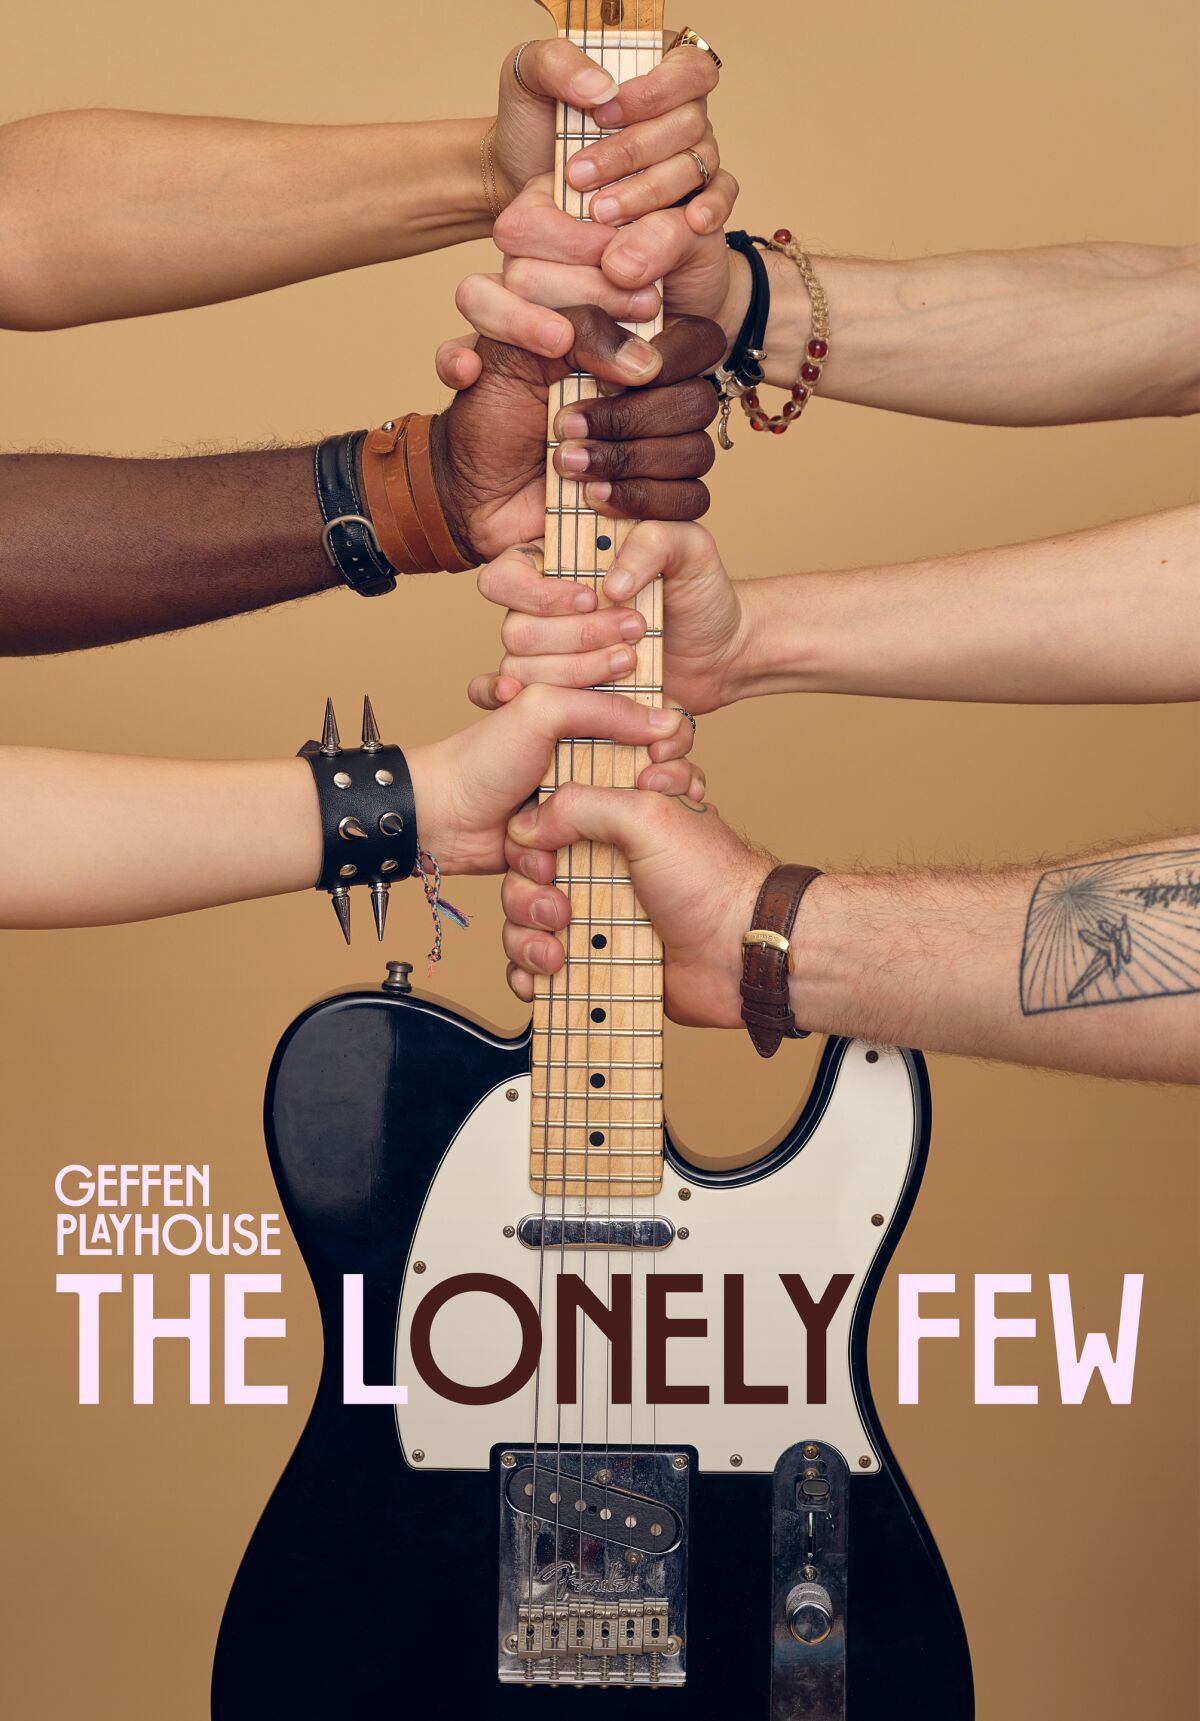 Multiple hands grasp the neck of a guitar in an image for "The Lonely Few."